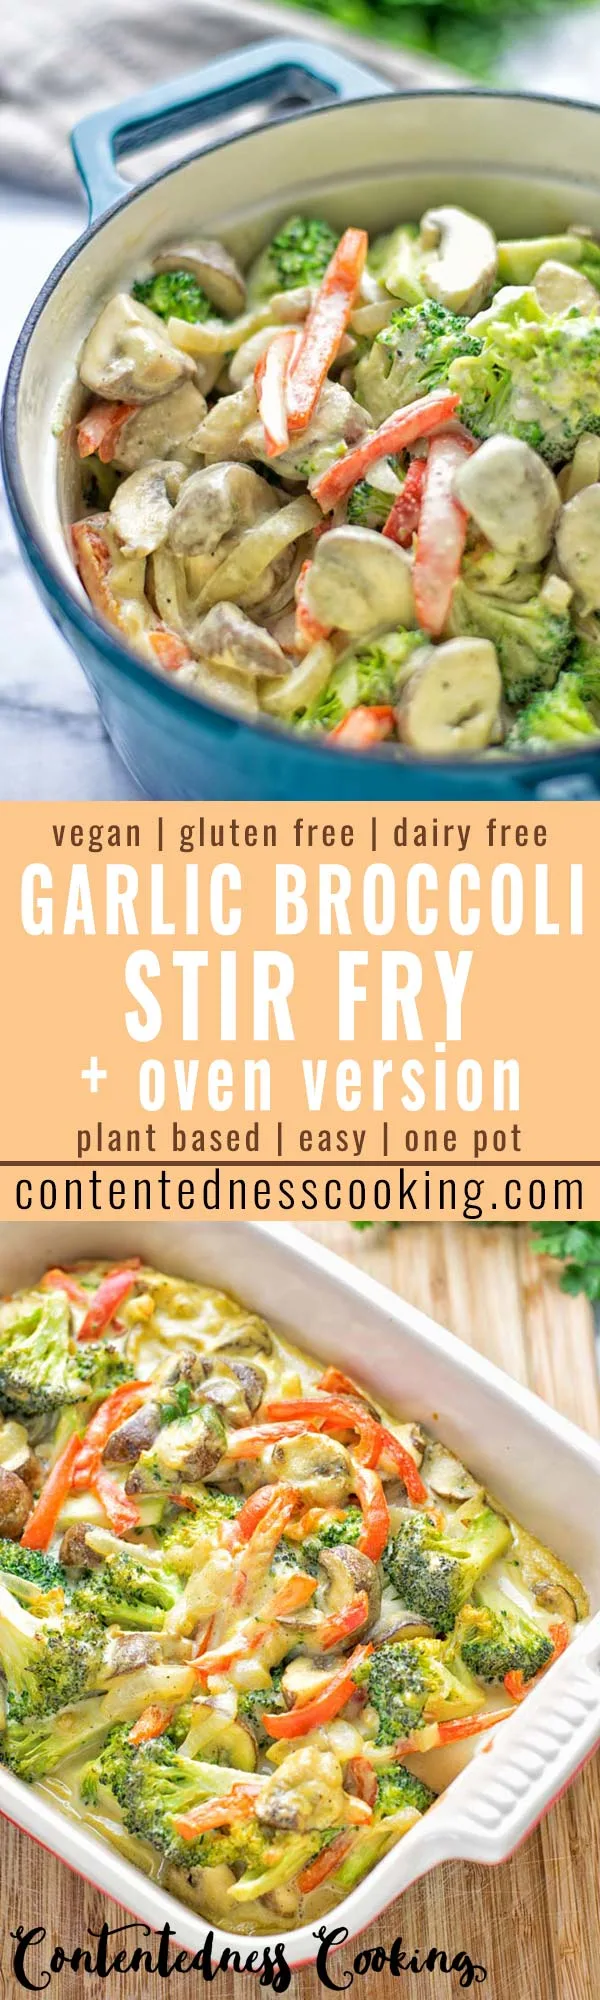 This amazingly satisfying and super easy to make Garlic Broccoli Stir Fry is entirely vegan, gluten free, and so delicious. You can make it in one pan or just make it in the oven. 2 versions, both so insanely delicious for dinner, lunch, meal prep, work lunch or stress free and fast family dinners. #vegan #glutenfree #vegetarian #dairyfree #garlic #broccoli #onepotmeals #onepandinner #familymealplanning #mealprep #worklunchideas #dinner #lunch #ovenmeals #contentednesscooking